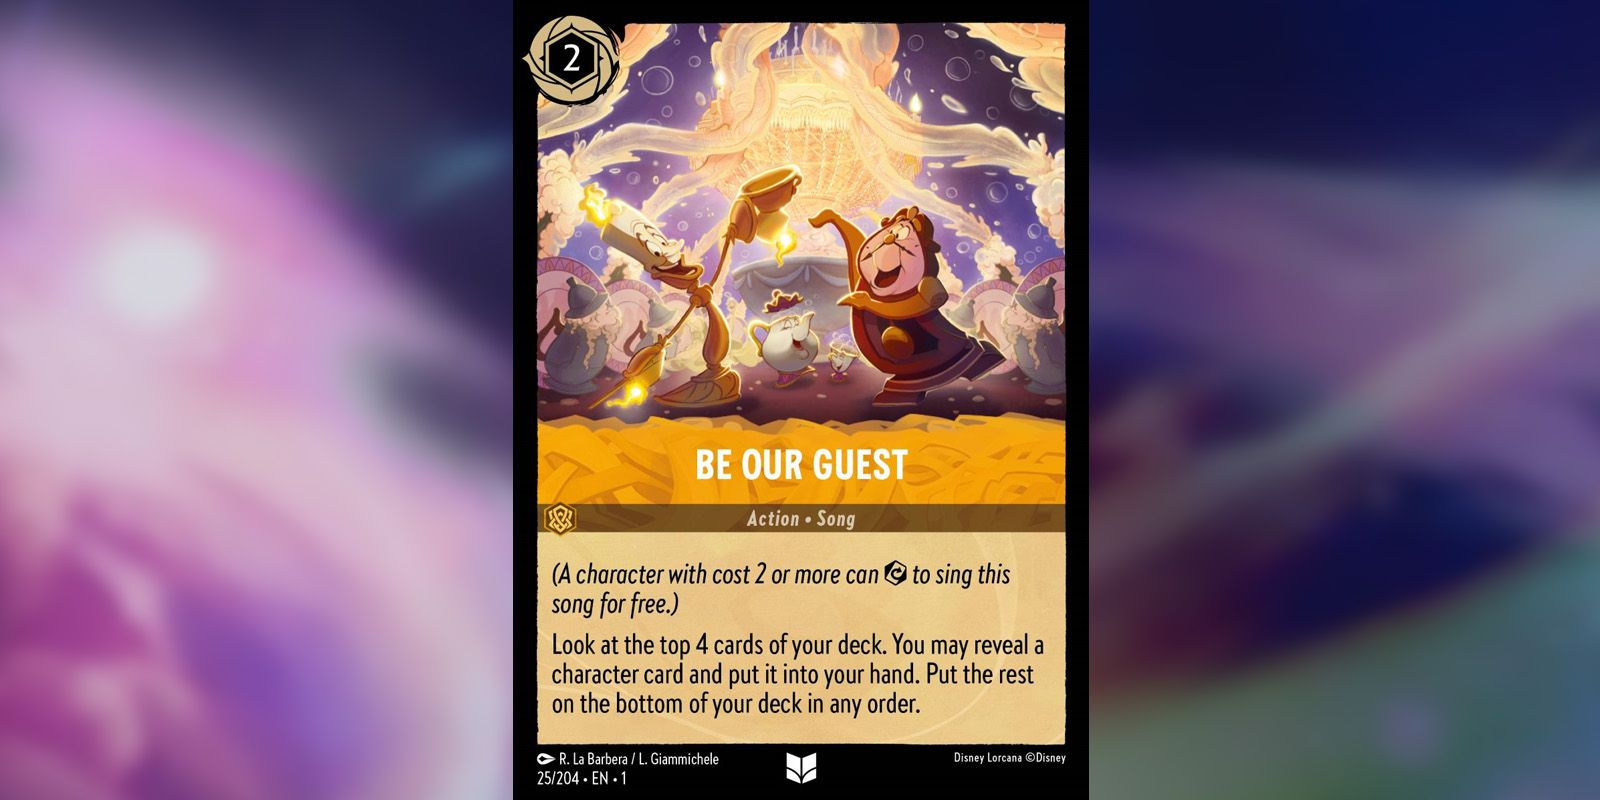 Be Our Guest Lorcana song card showing Lumiere and Cogsworth.